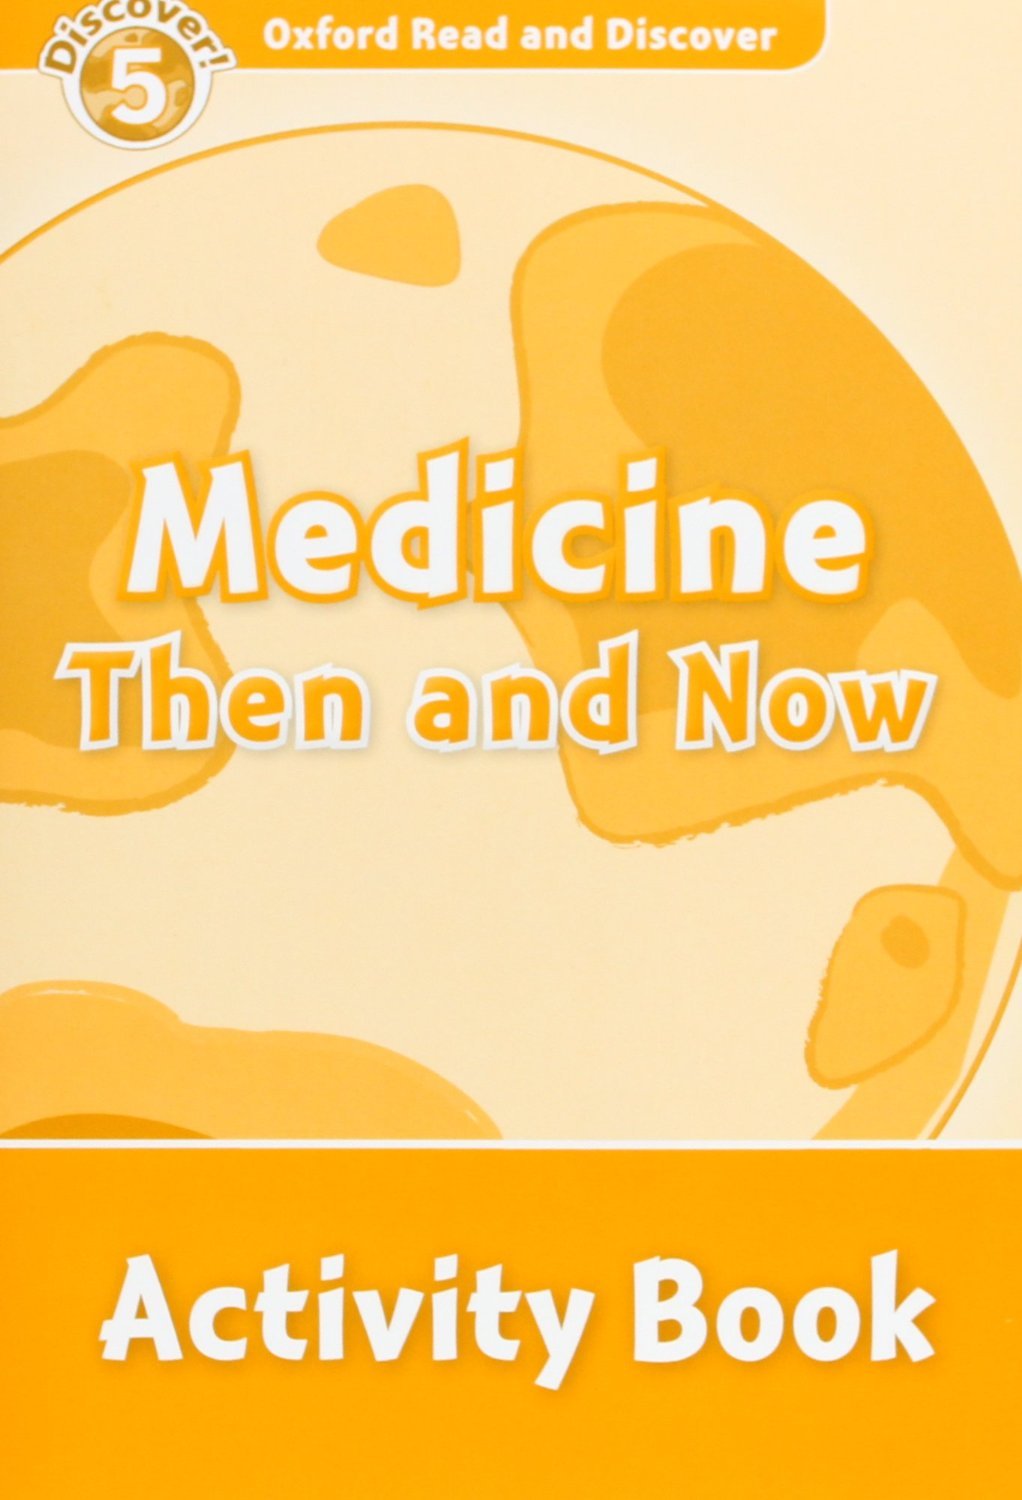 MEDICINE THEN AND NOW (OXFORD READ AND DISCOVER, LEVEL 5) Activity Book 